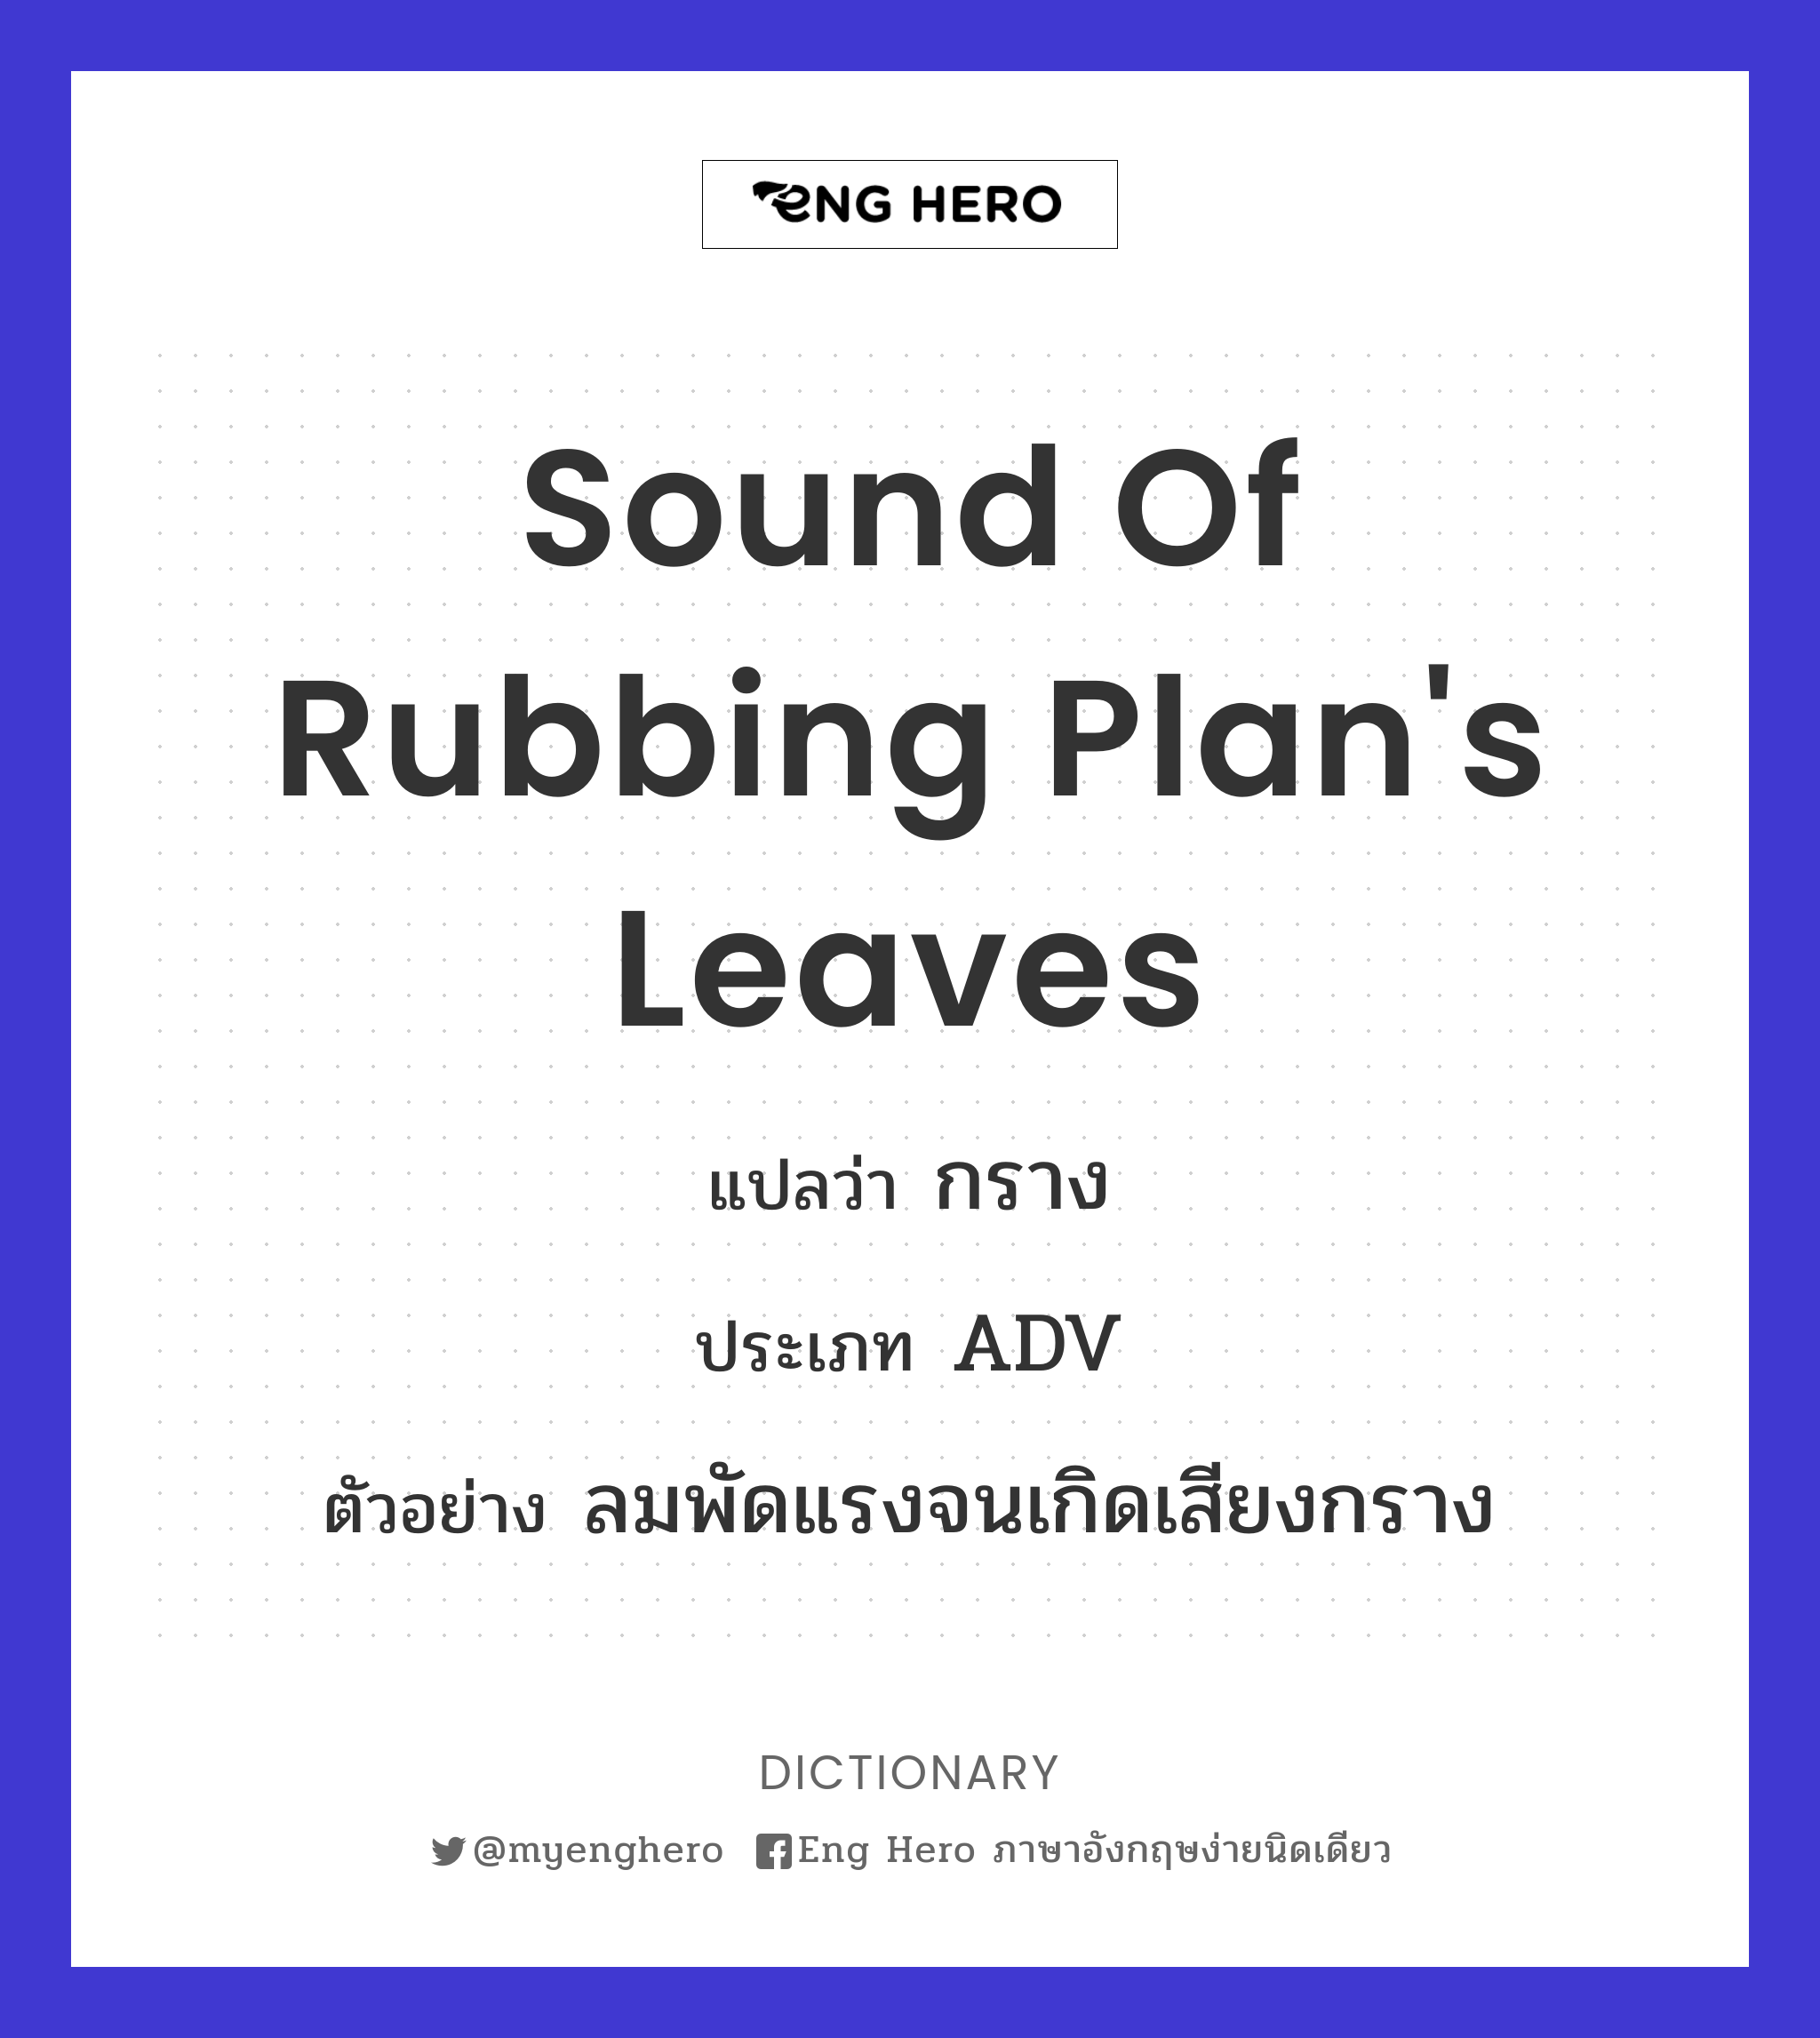 sound of rubbing plan's leaves